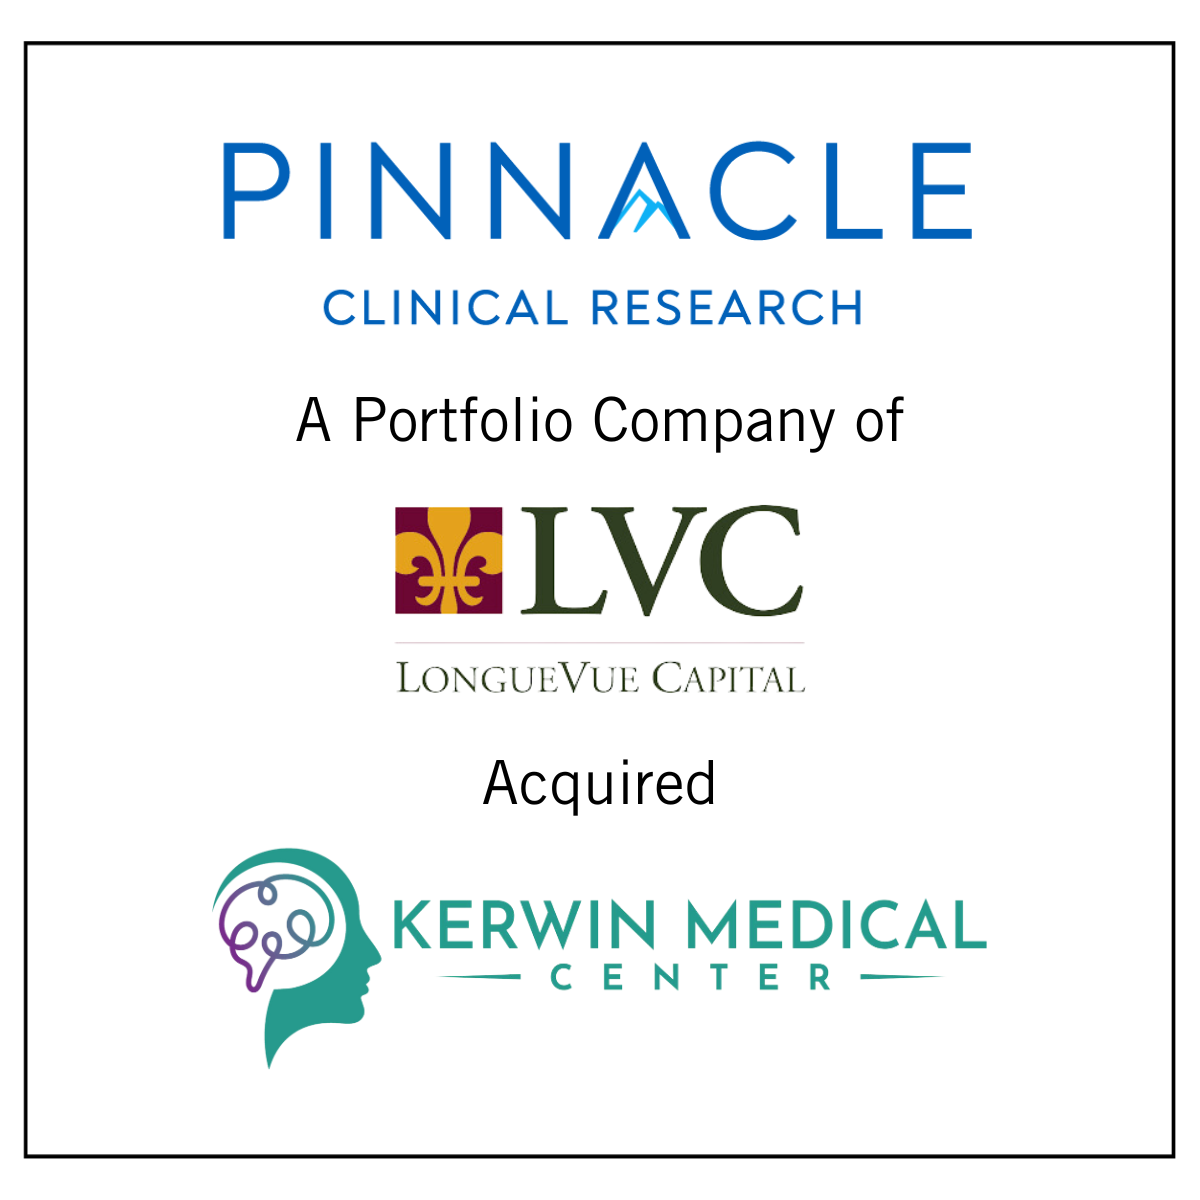 Pinnacle Clinical Research, a Portfolio Company of LongVue Capital, Acquires Kerwin Medical Center to Bolster Clinical Trial Site Network and Trial Execution Capabilities